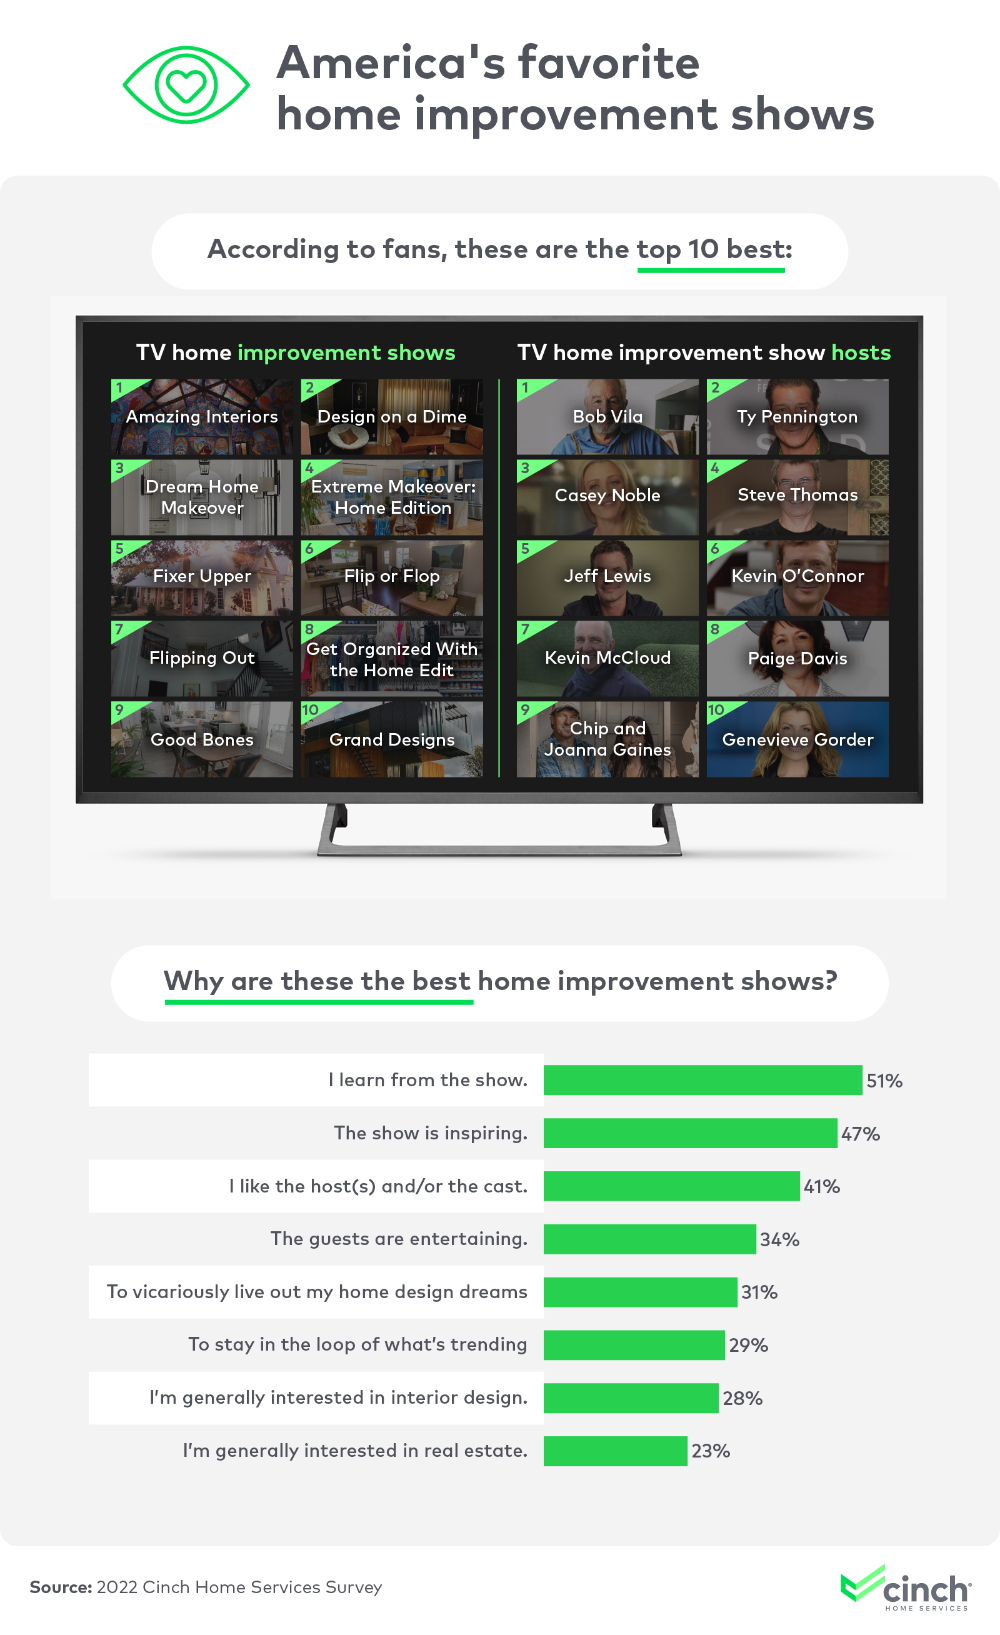 Infographic that explores America's favorite home improvement shows and why according to fans.